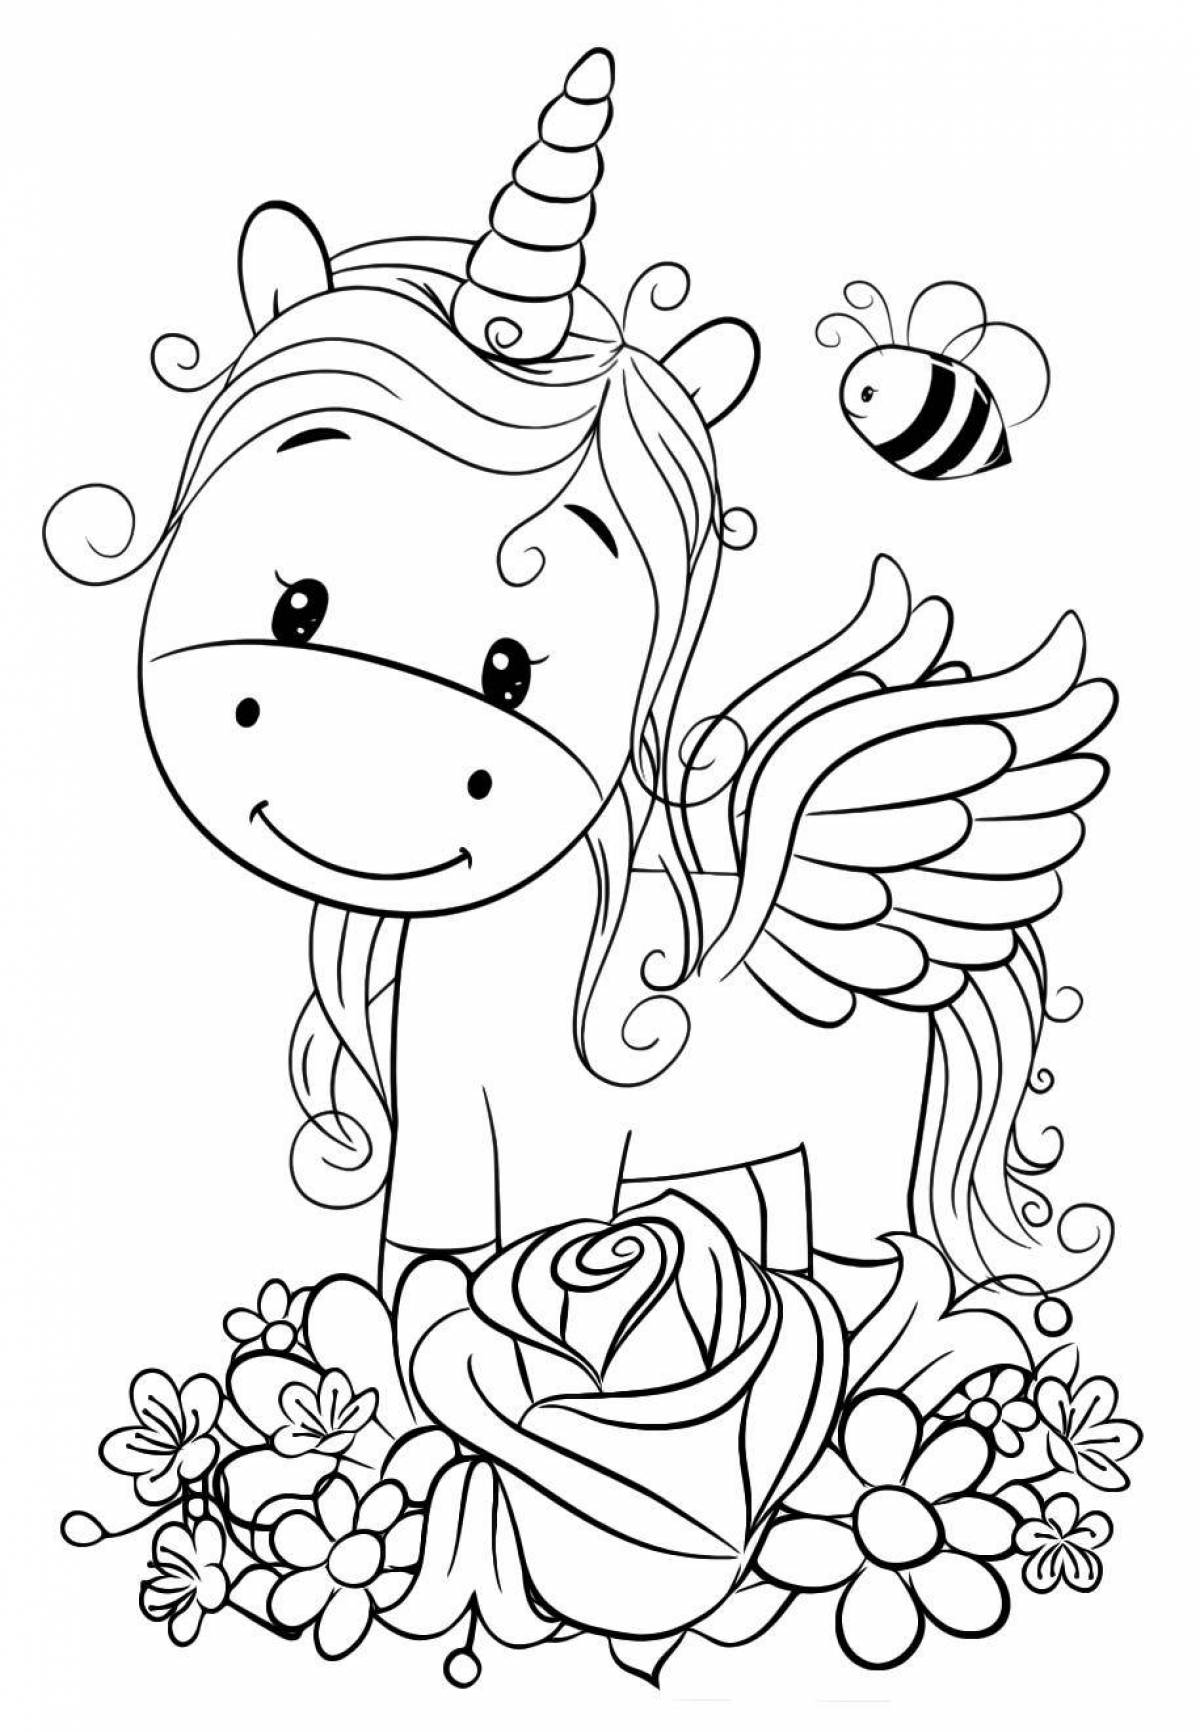 Adorable coloring book for girls cute unicorns